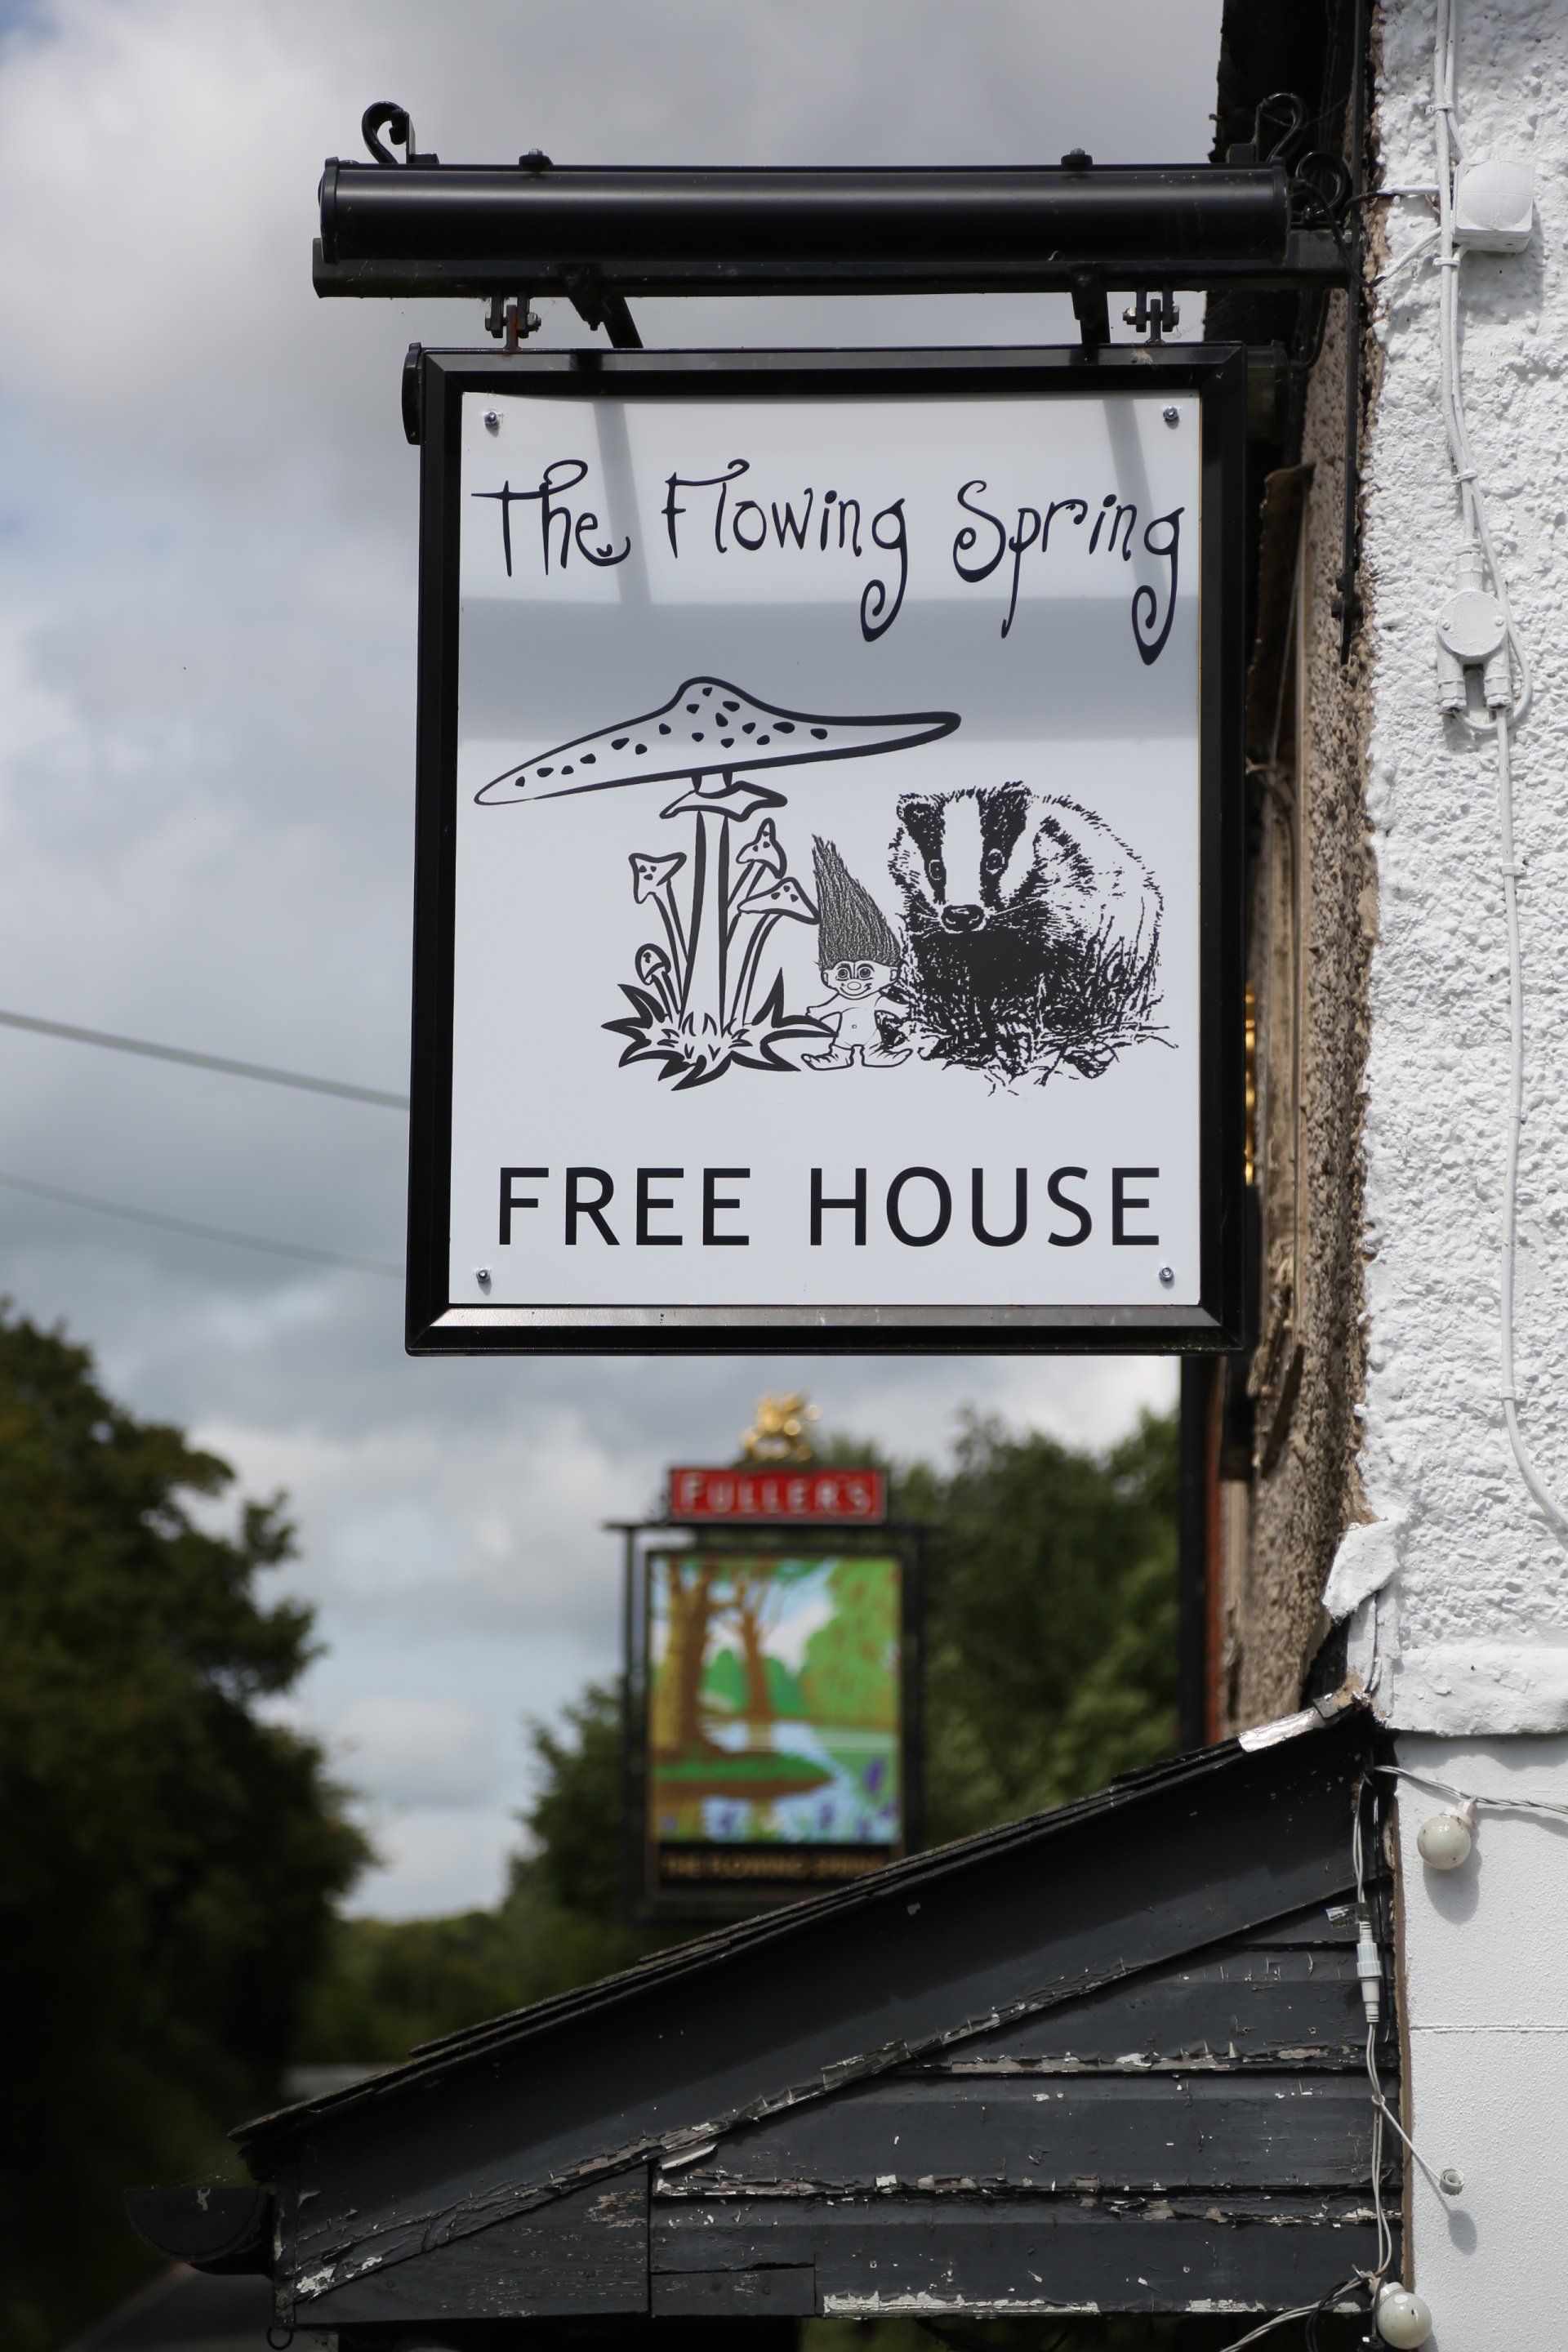 The Flowing Spring, now a Free House